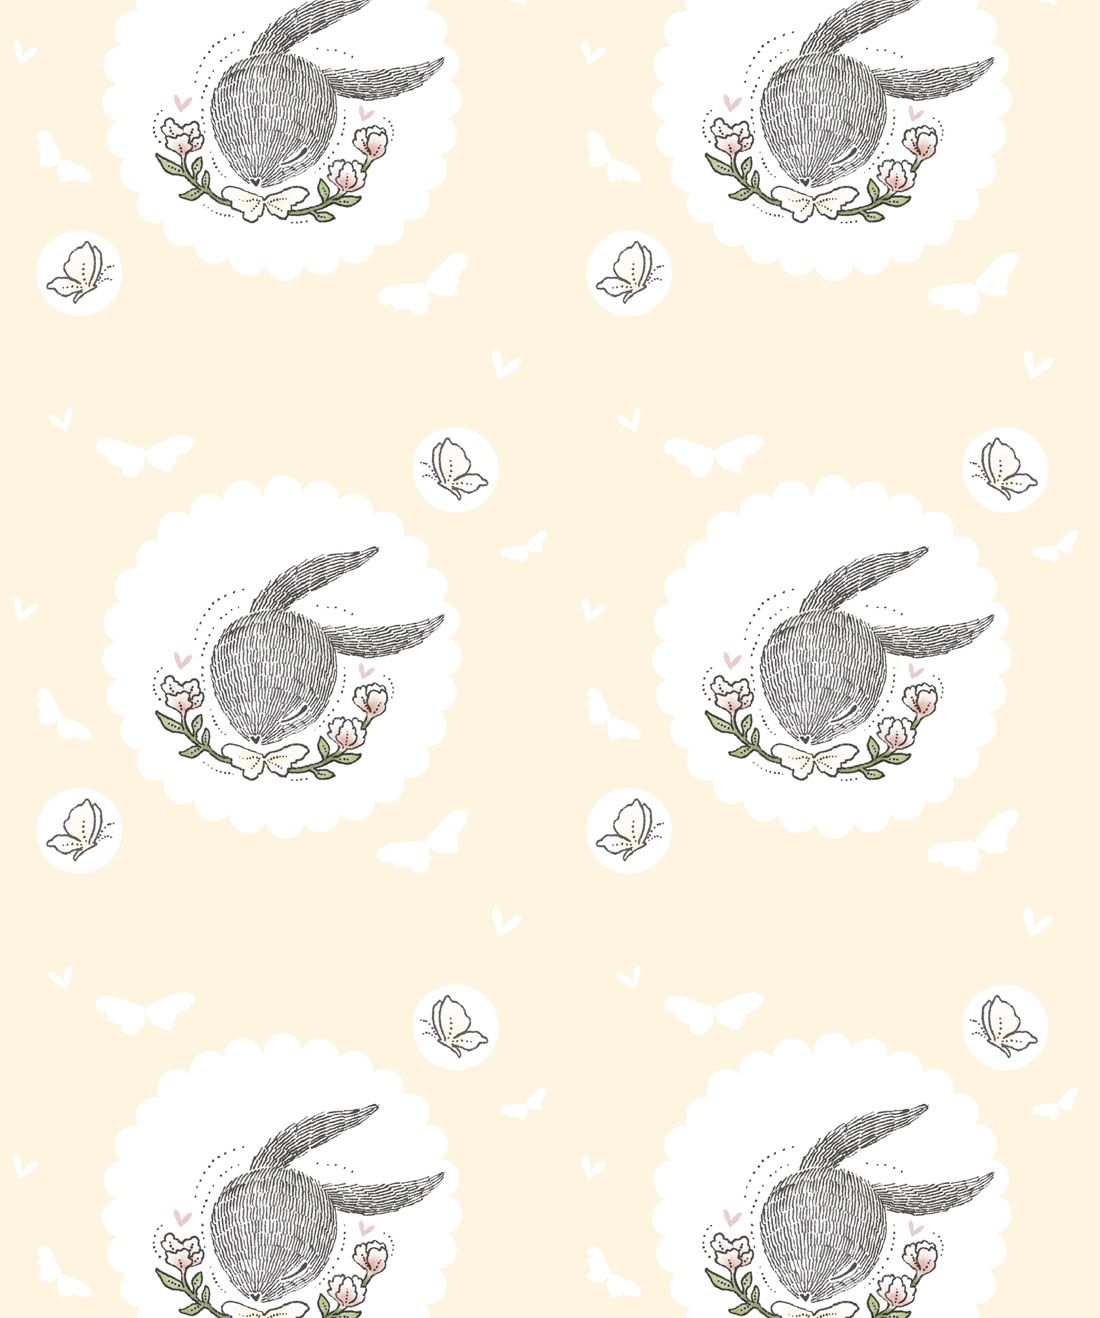 Rabbit & Butterfly is a cute illustrated Wallpaper